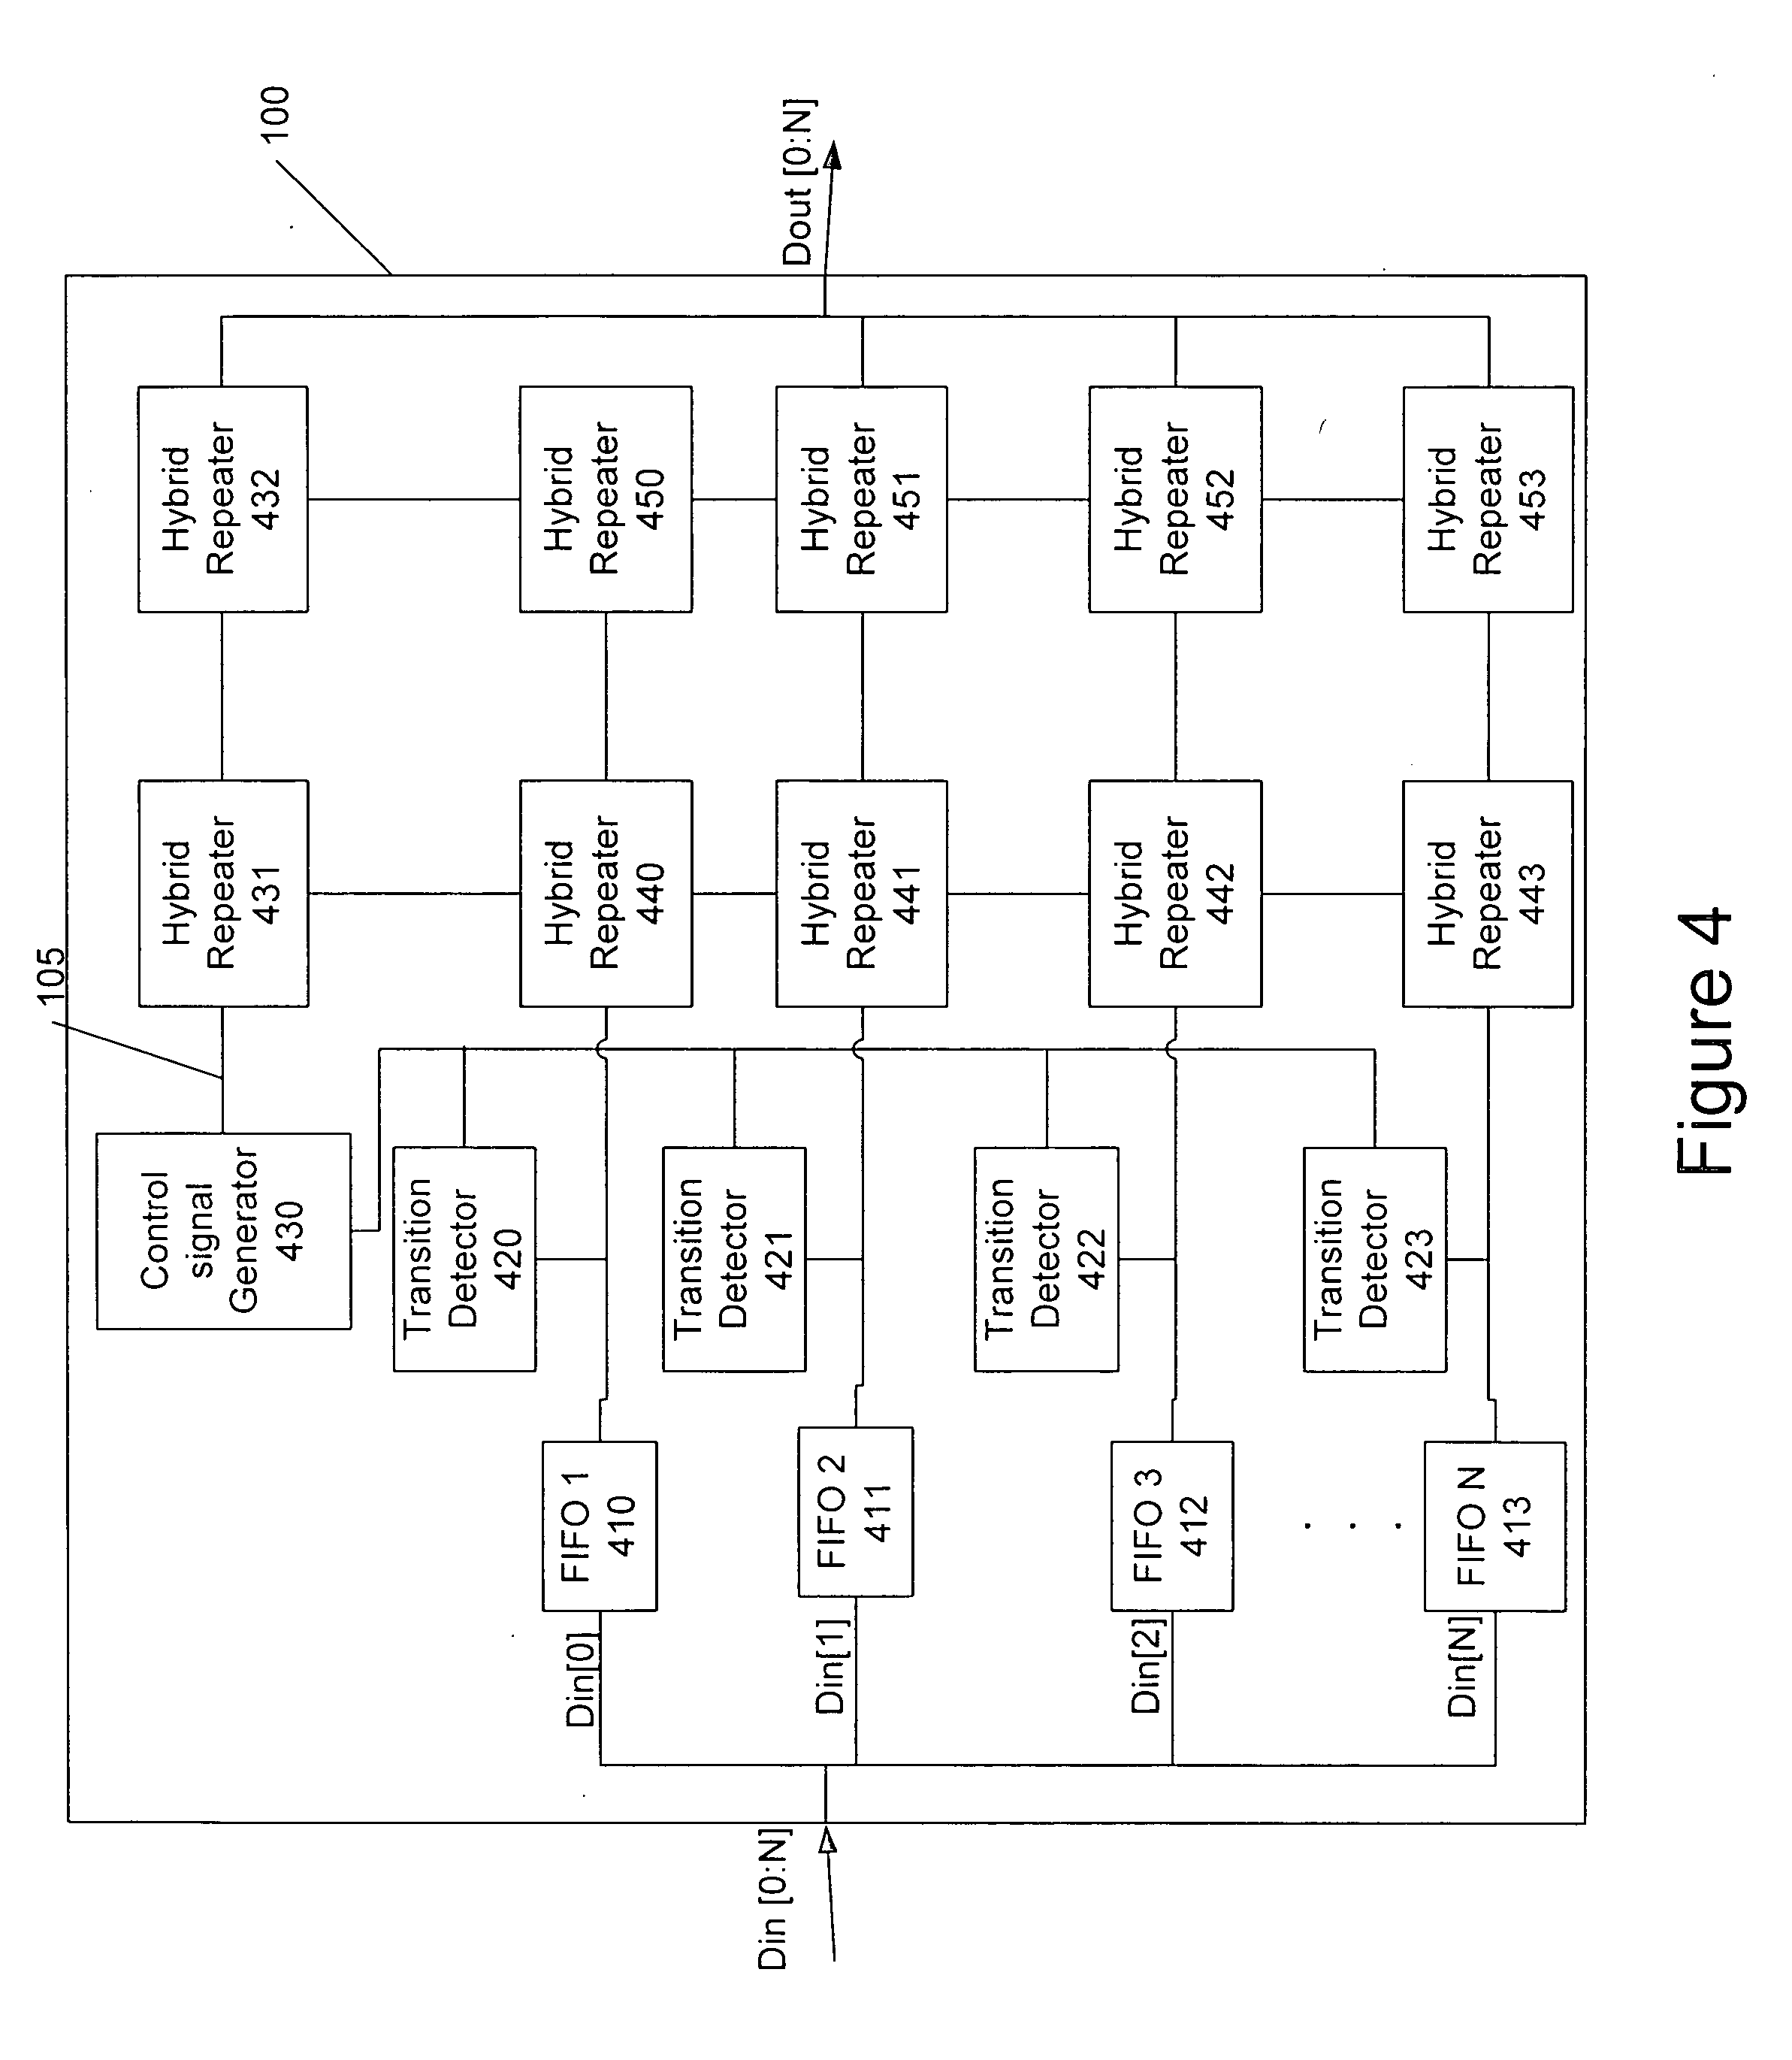 Integrated circuit devices having on-chip adaptive bandwidth buses and related methods